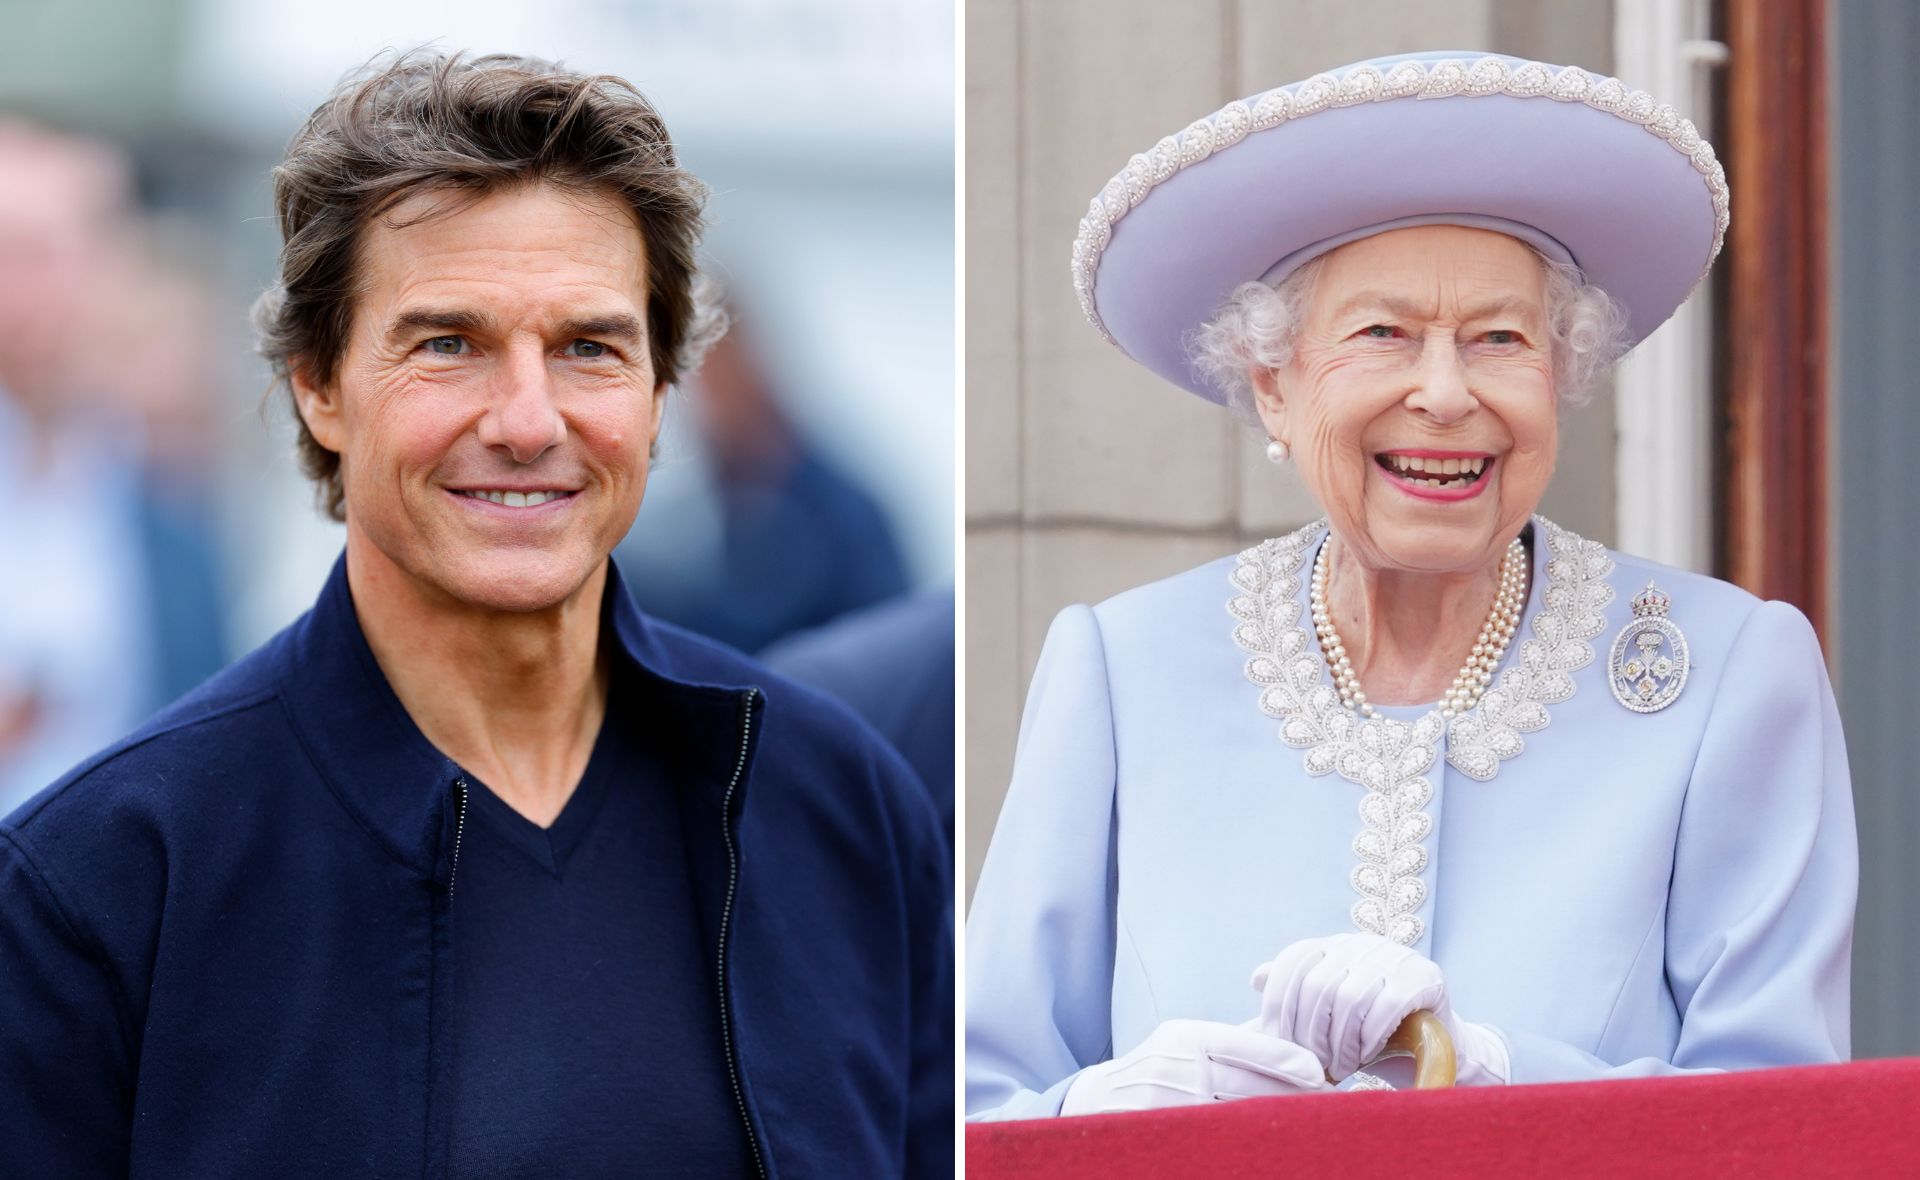 How the unlikely friendship between the late Queen and Tom Cruise began